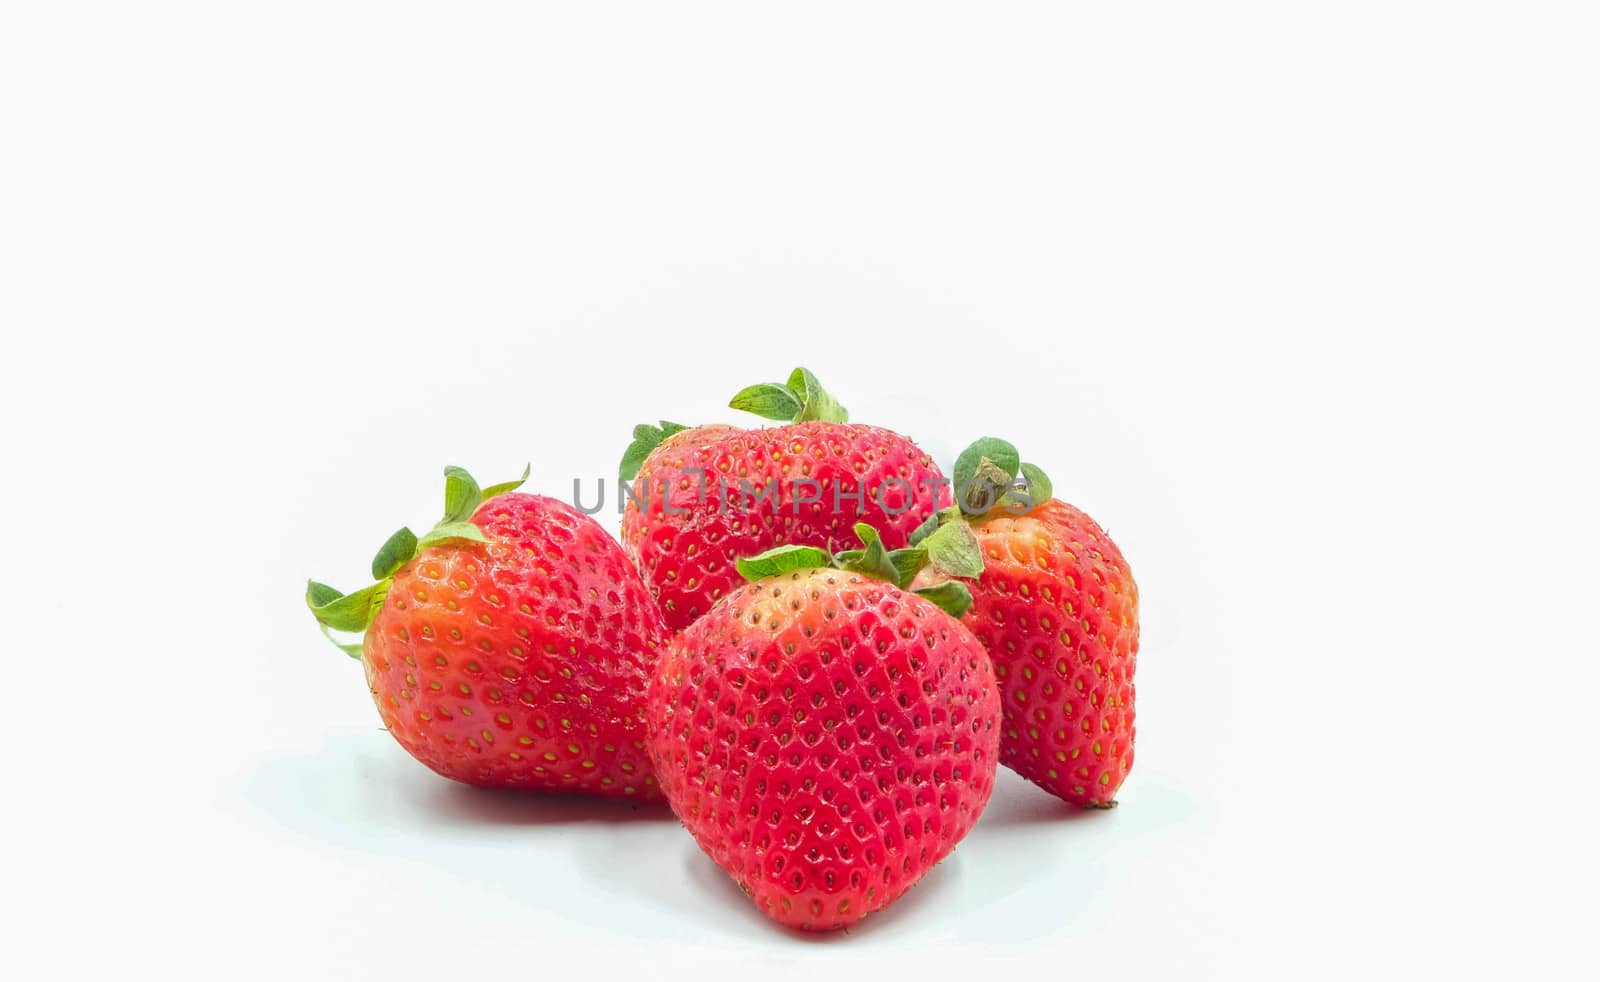 Red Strawberry  Isolated on White Background by Bonn2210